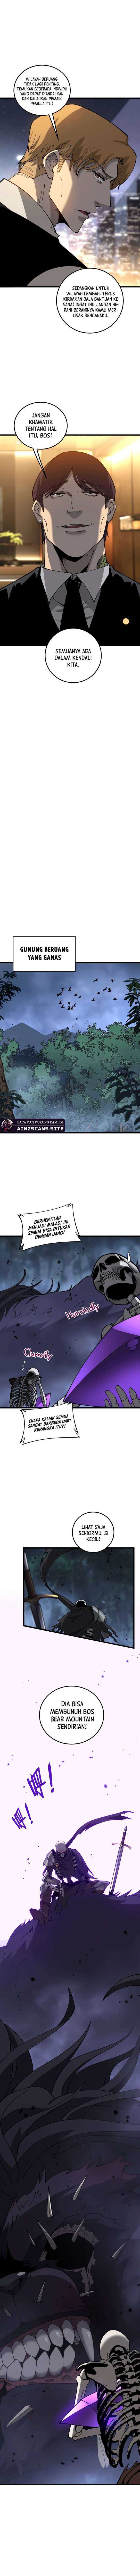 Skeleton Evolution: Starting from Being Summoned by a Goddess Chapter 07